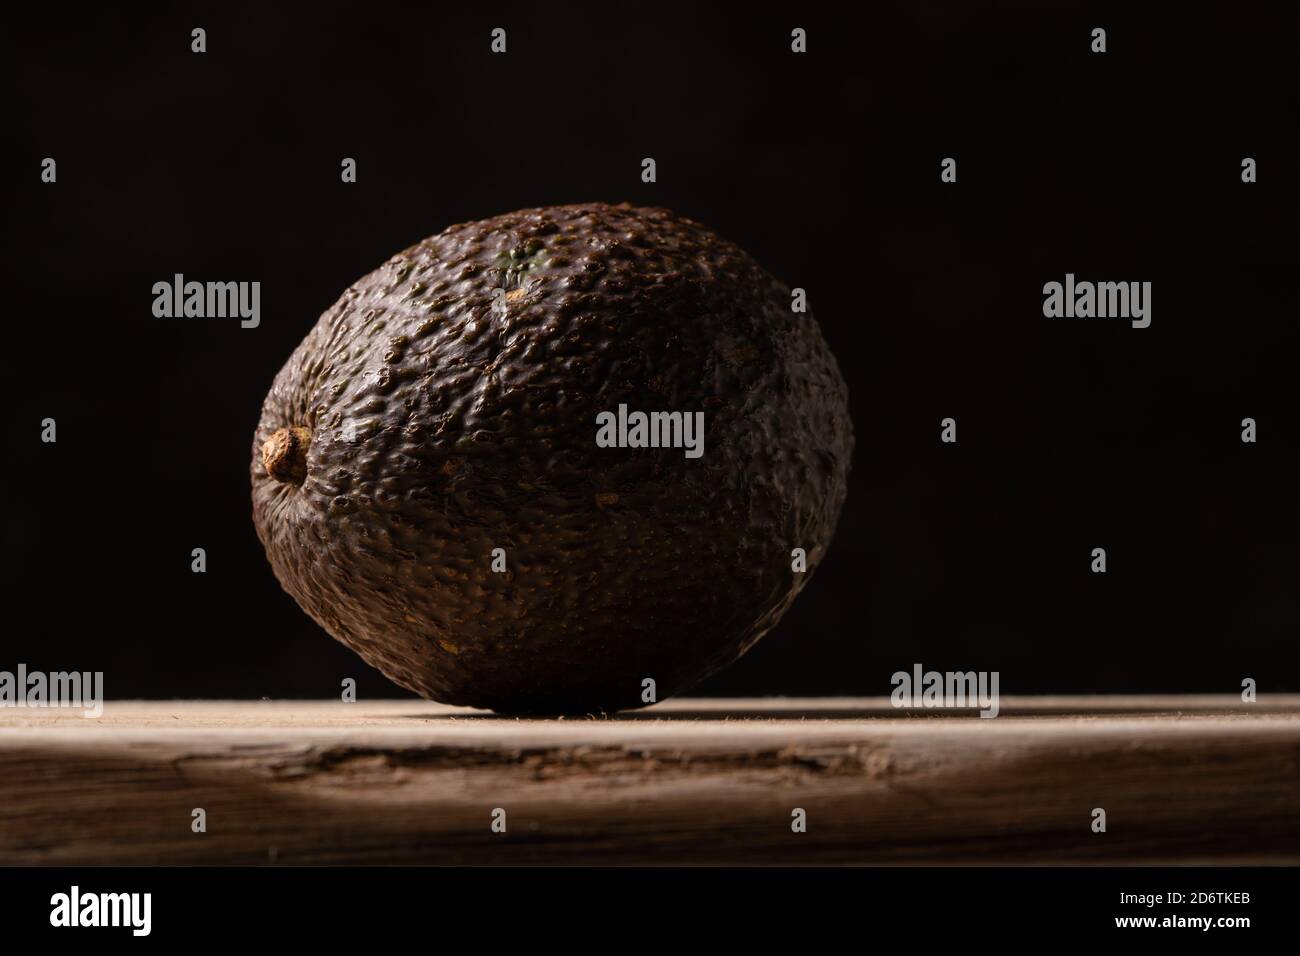 Fresh avocado on wooden board on black background. High quality photo Stock Photo